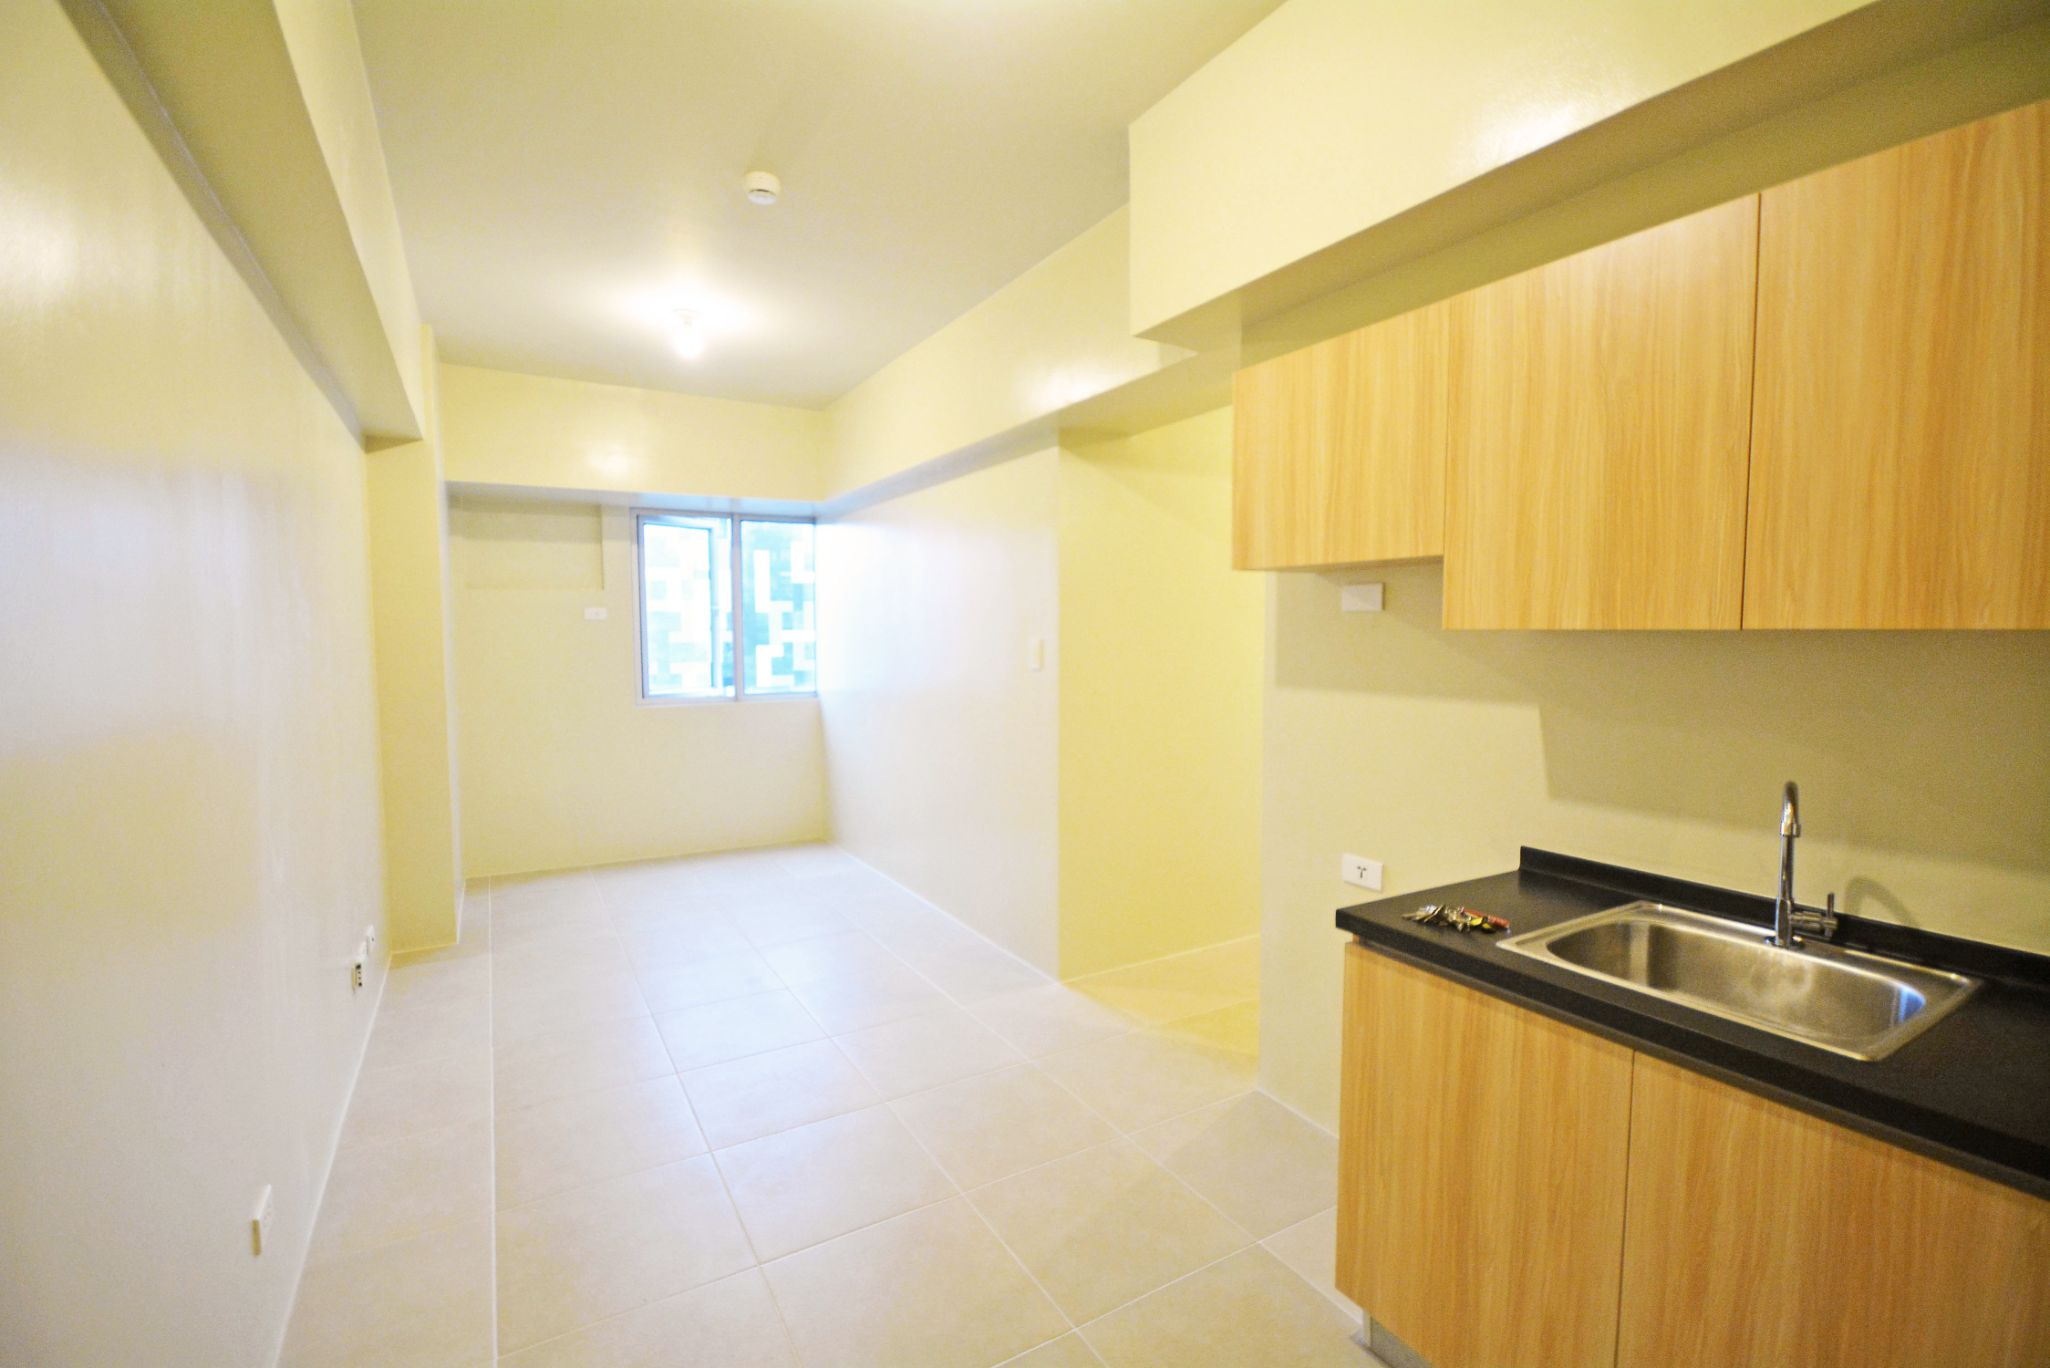 3-bedroom unit for Lease in Avida Towers Turf, Taguig City